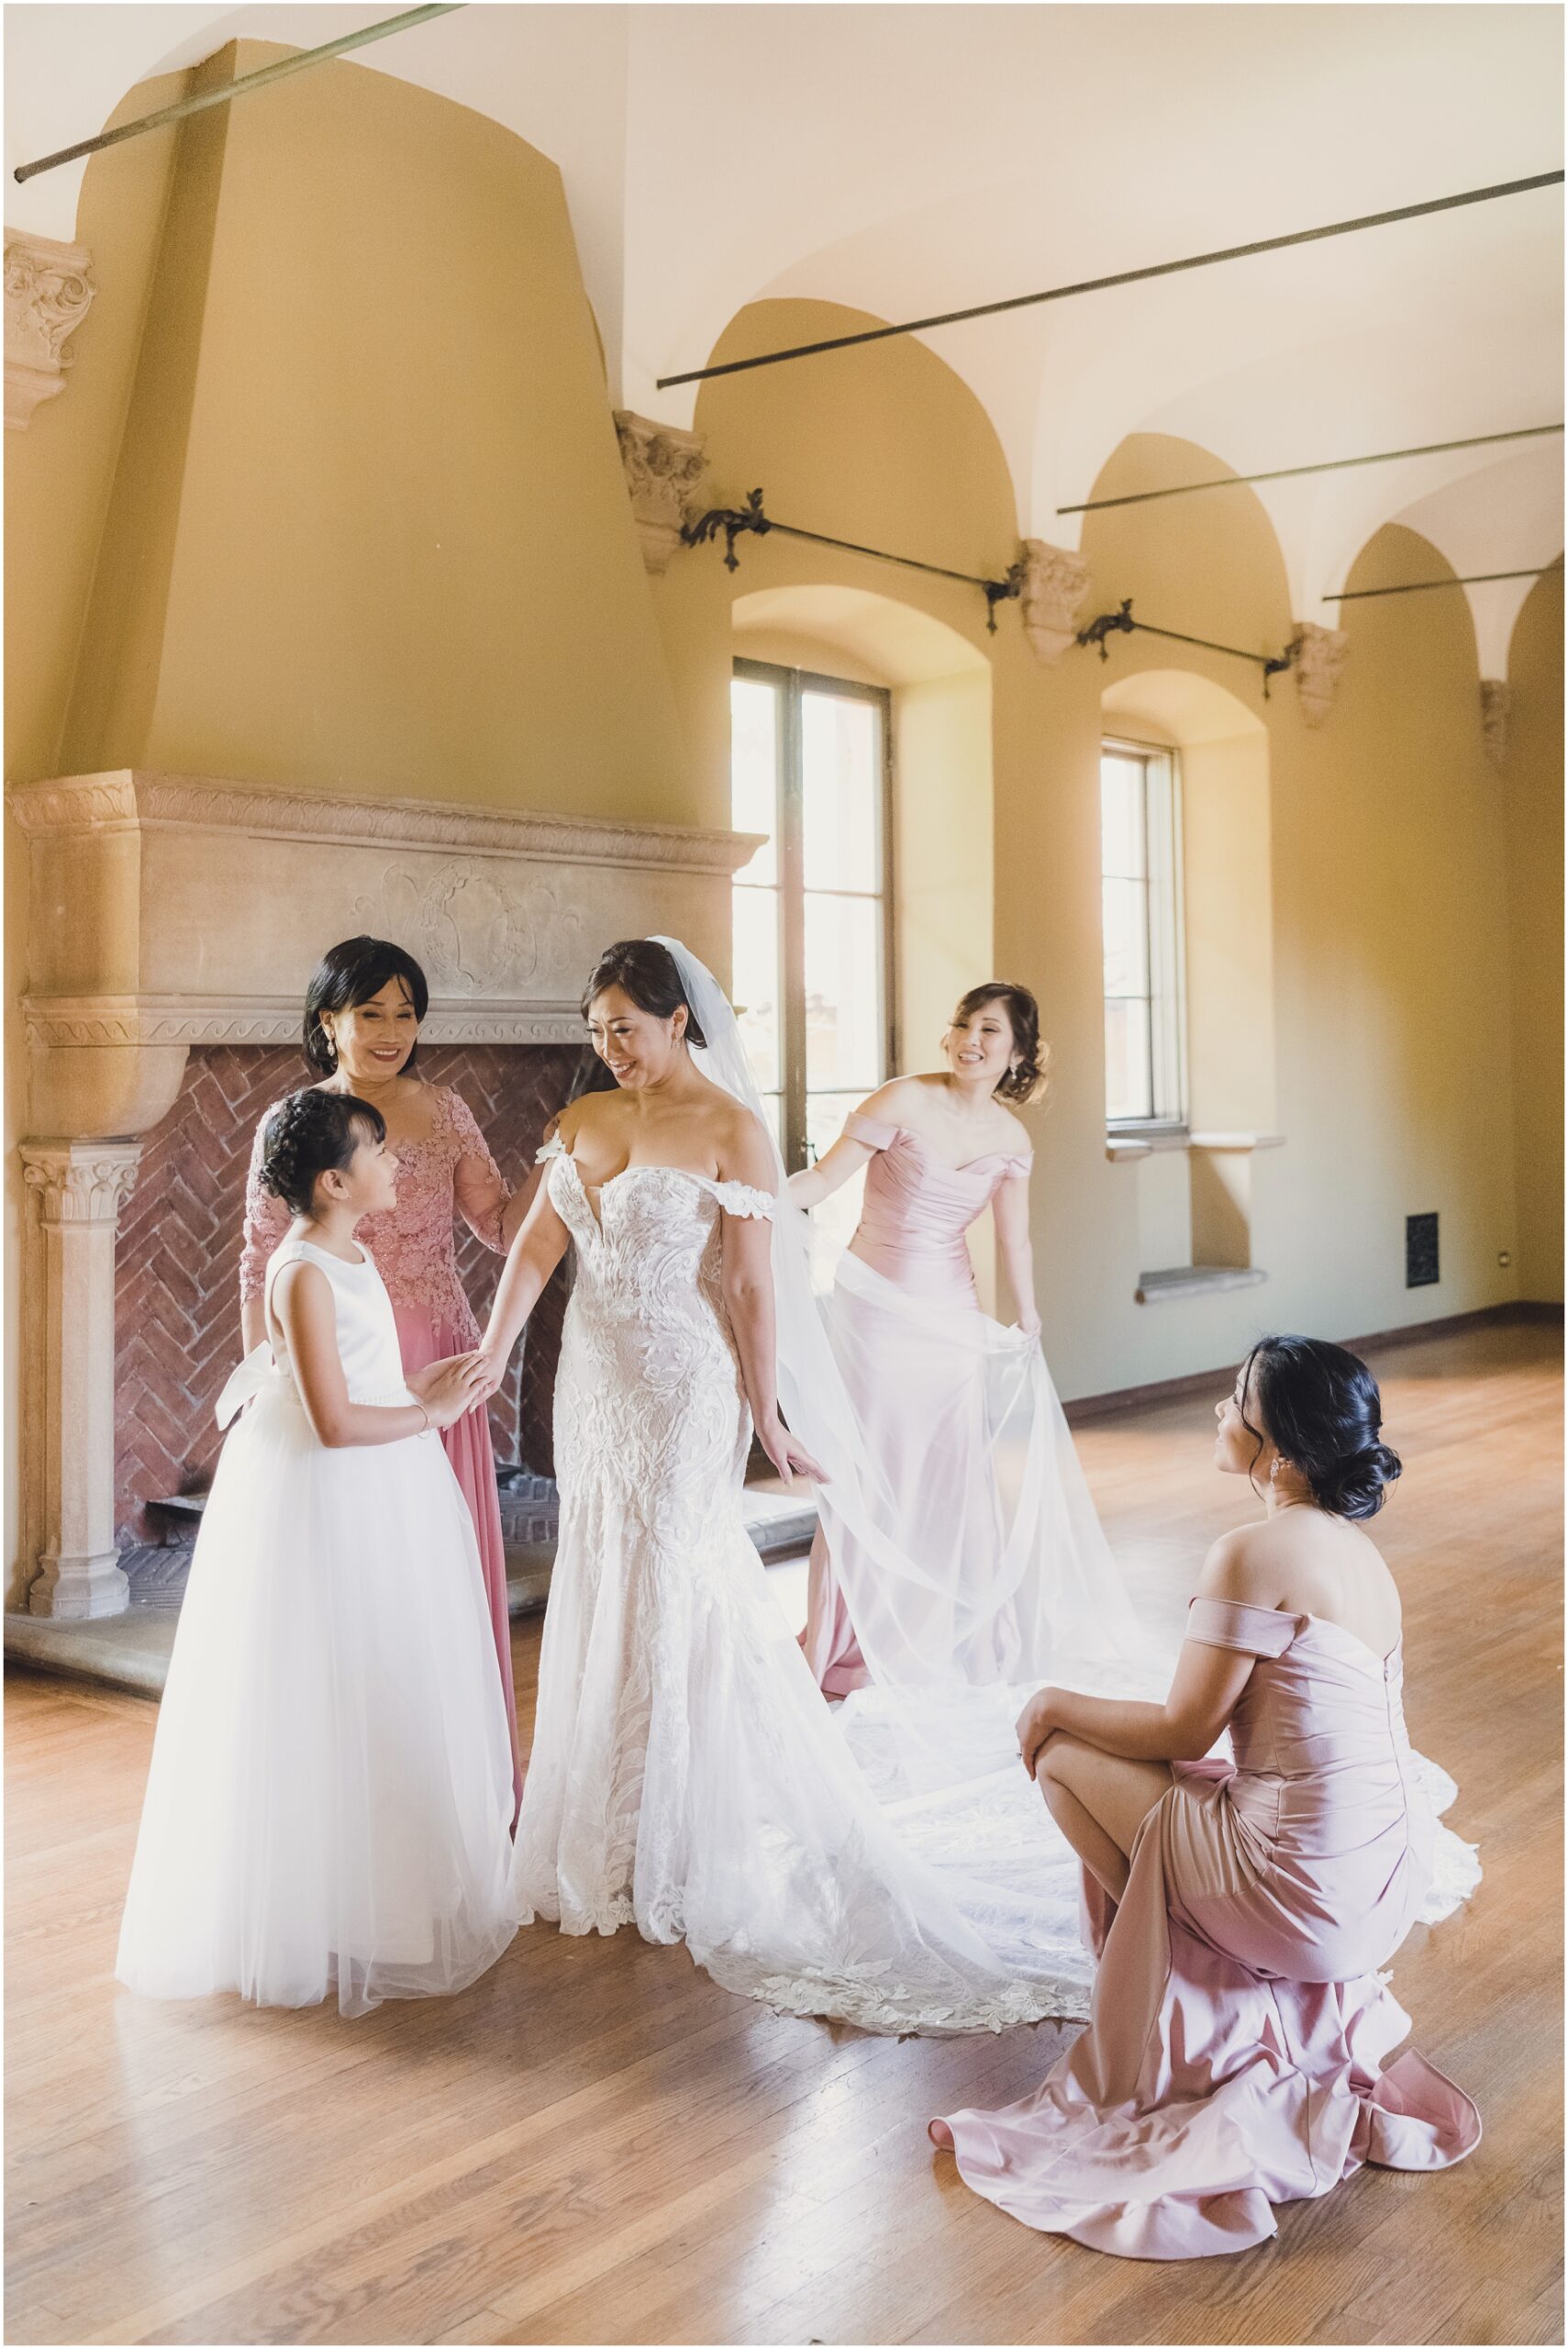 A bride and her bridesmaids getting ready for a wedding at Villa del sol d'Oro. The bride is looking at her daughter with love, while her bridesmaids look on. The room has a large fireplace with brick and stone, while the walls have arches and the floors are hardwood